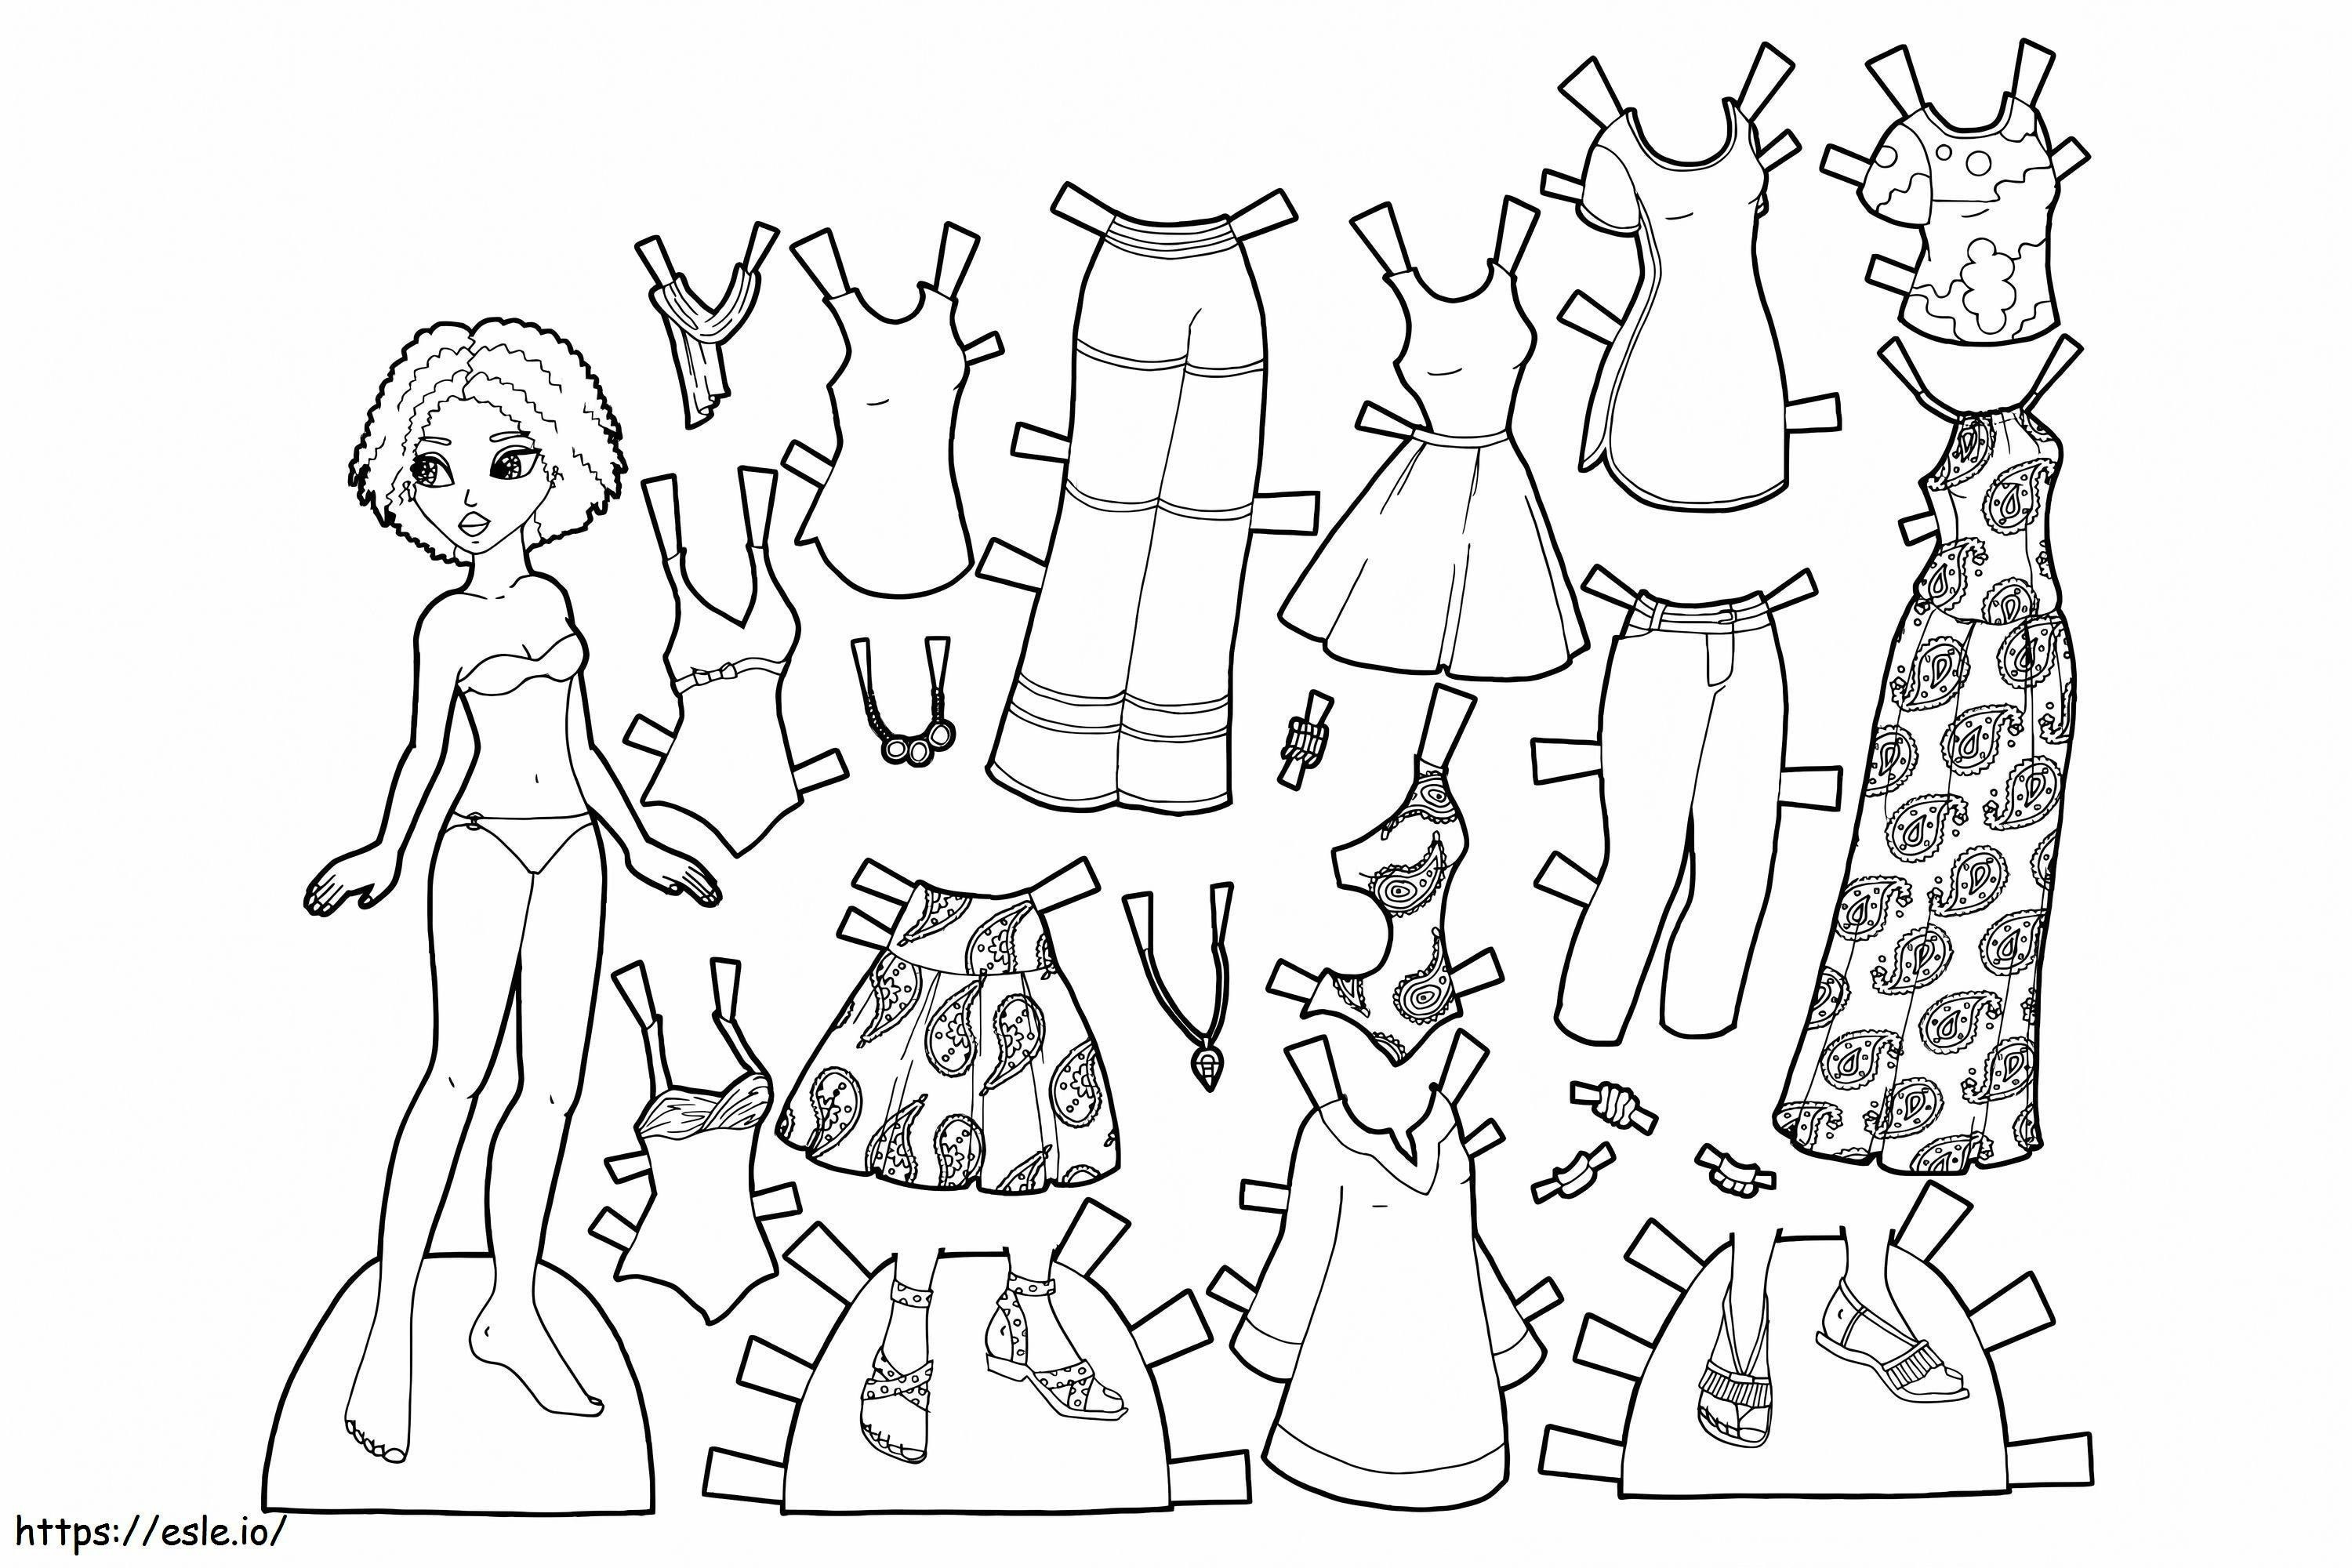 Paper Dolls 1 coloring page